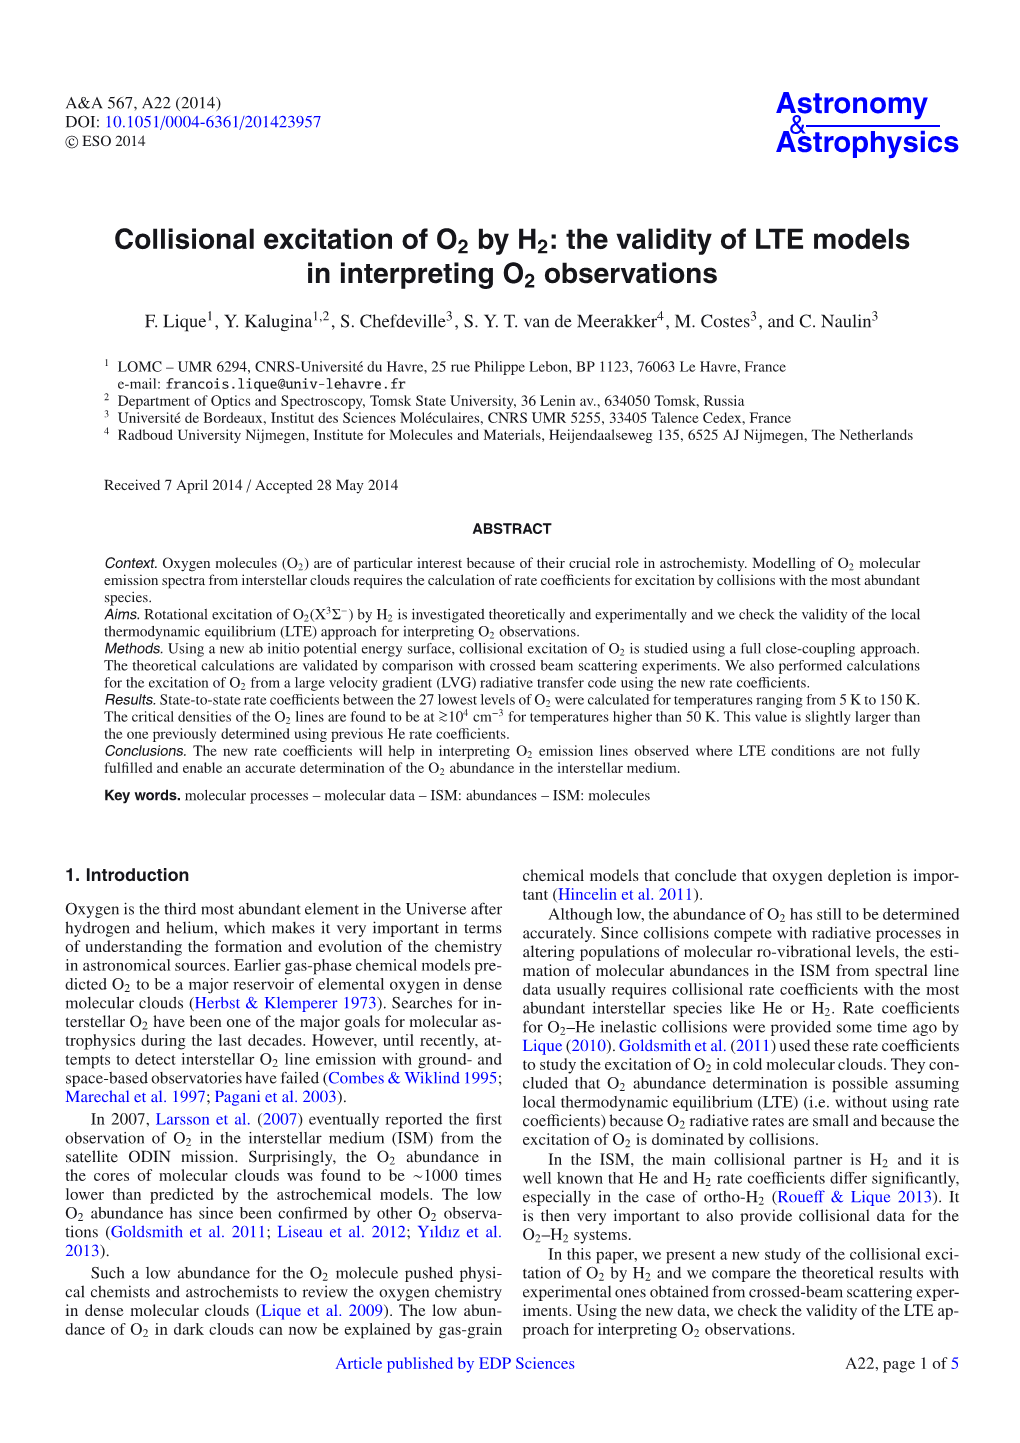 Collisional Excitation of O2 by H2: the Validity of LTE Models in Interpreting O2 Observations